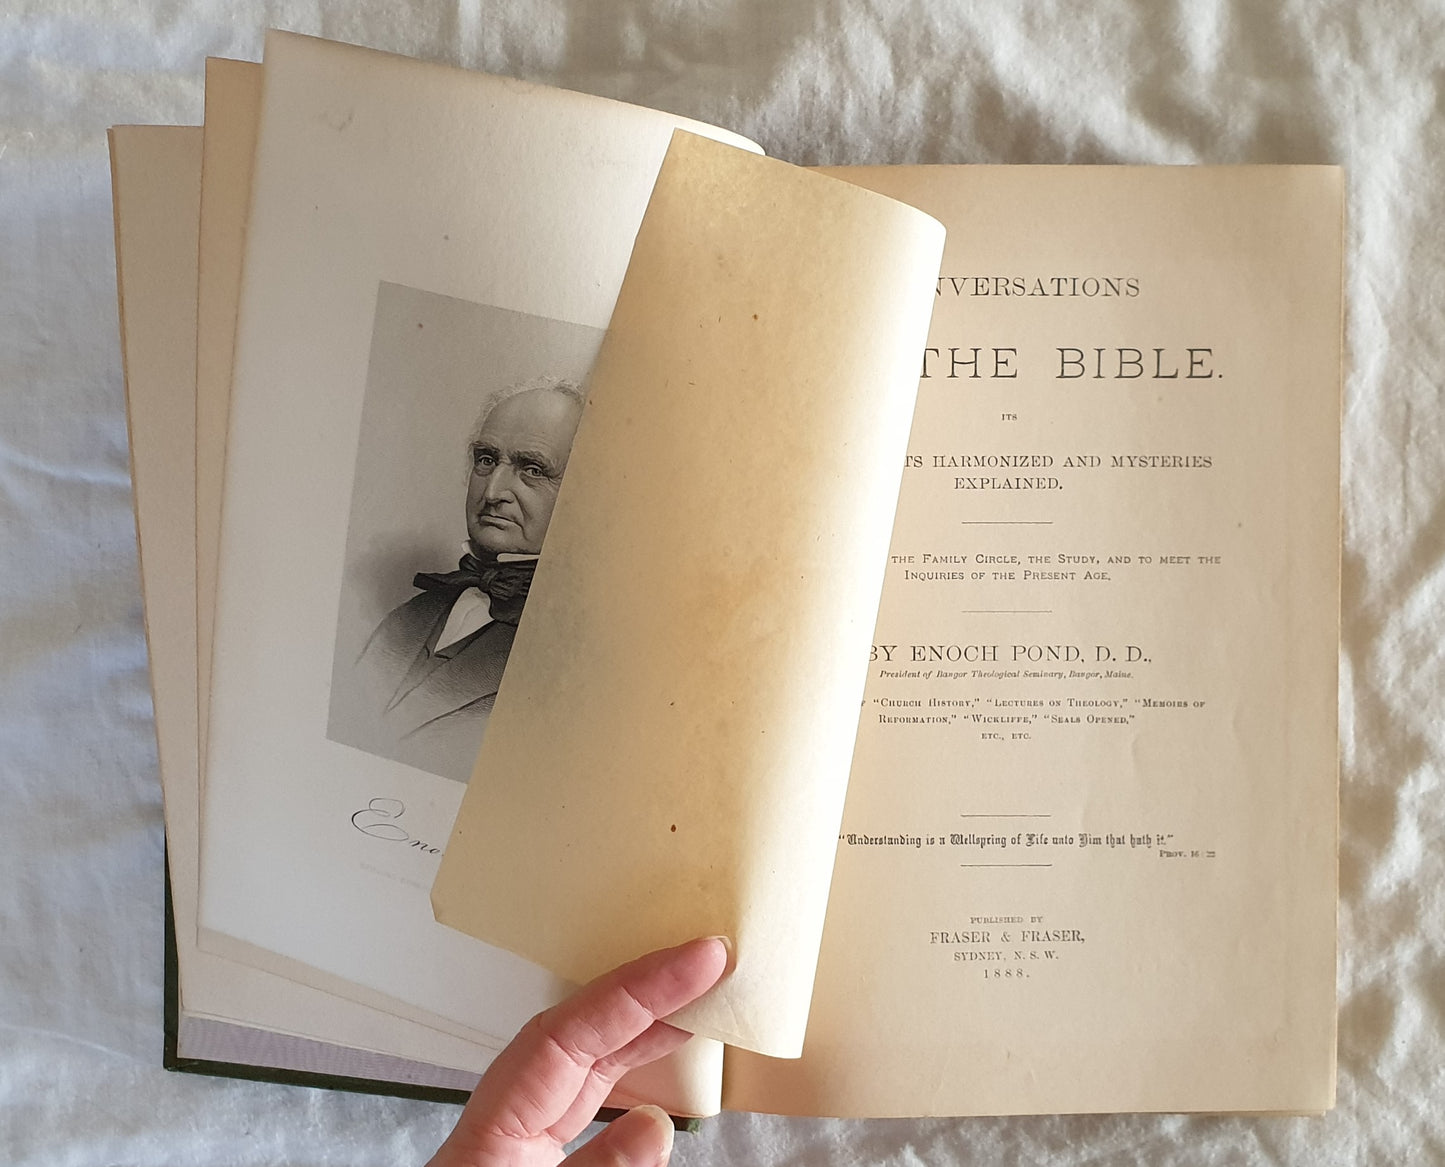 Conversations On The Bible by Enoch Pond